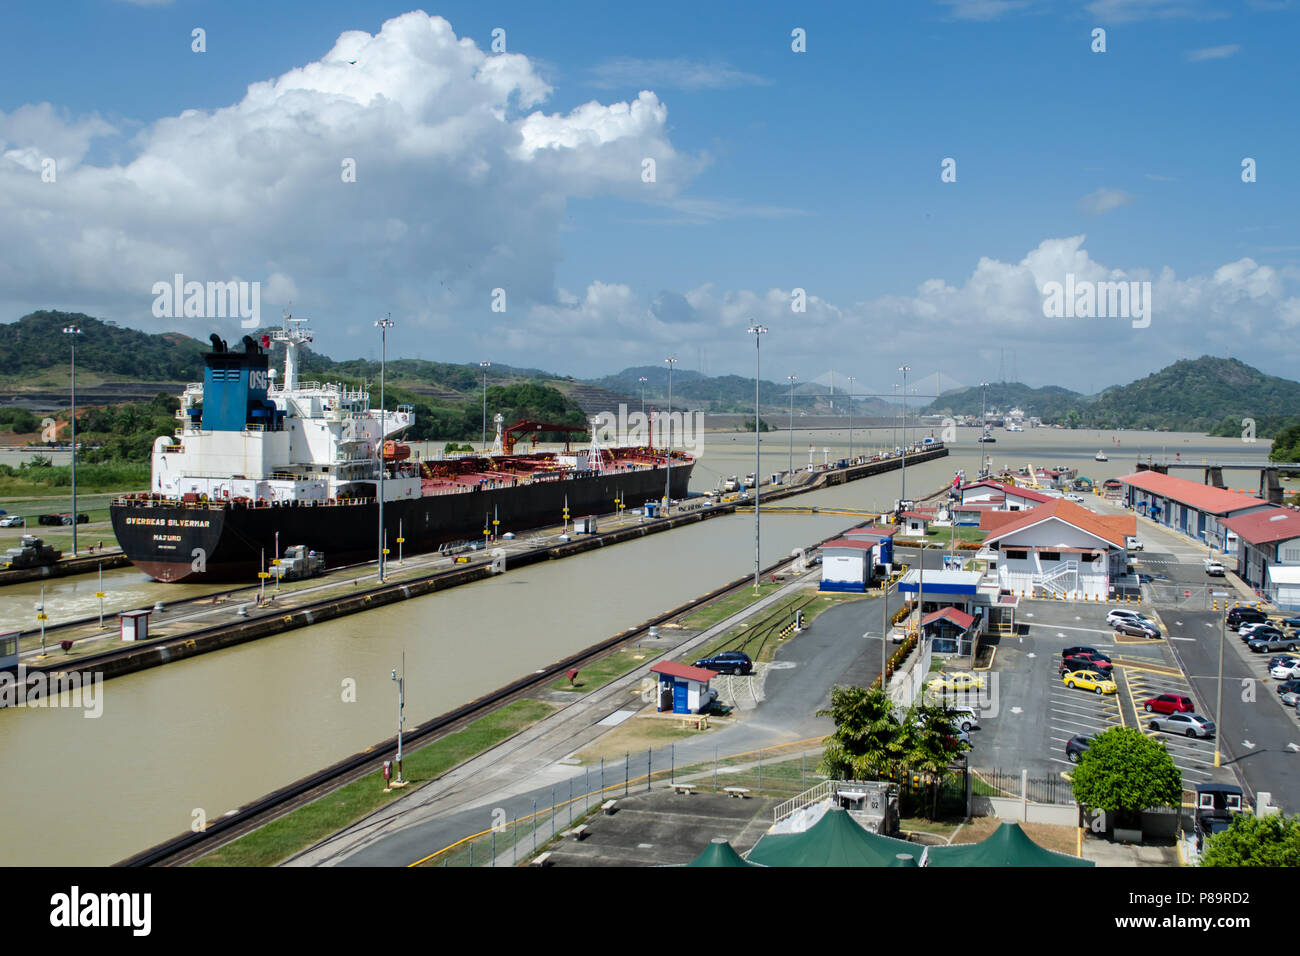 A view of a ship during its transit through Panama Canal Miraflores Locks Stock Photo